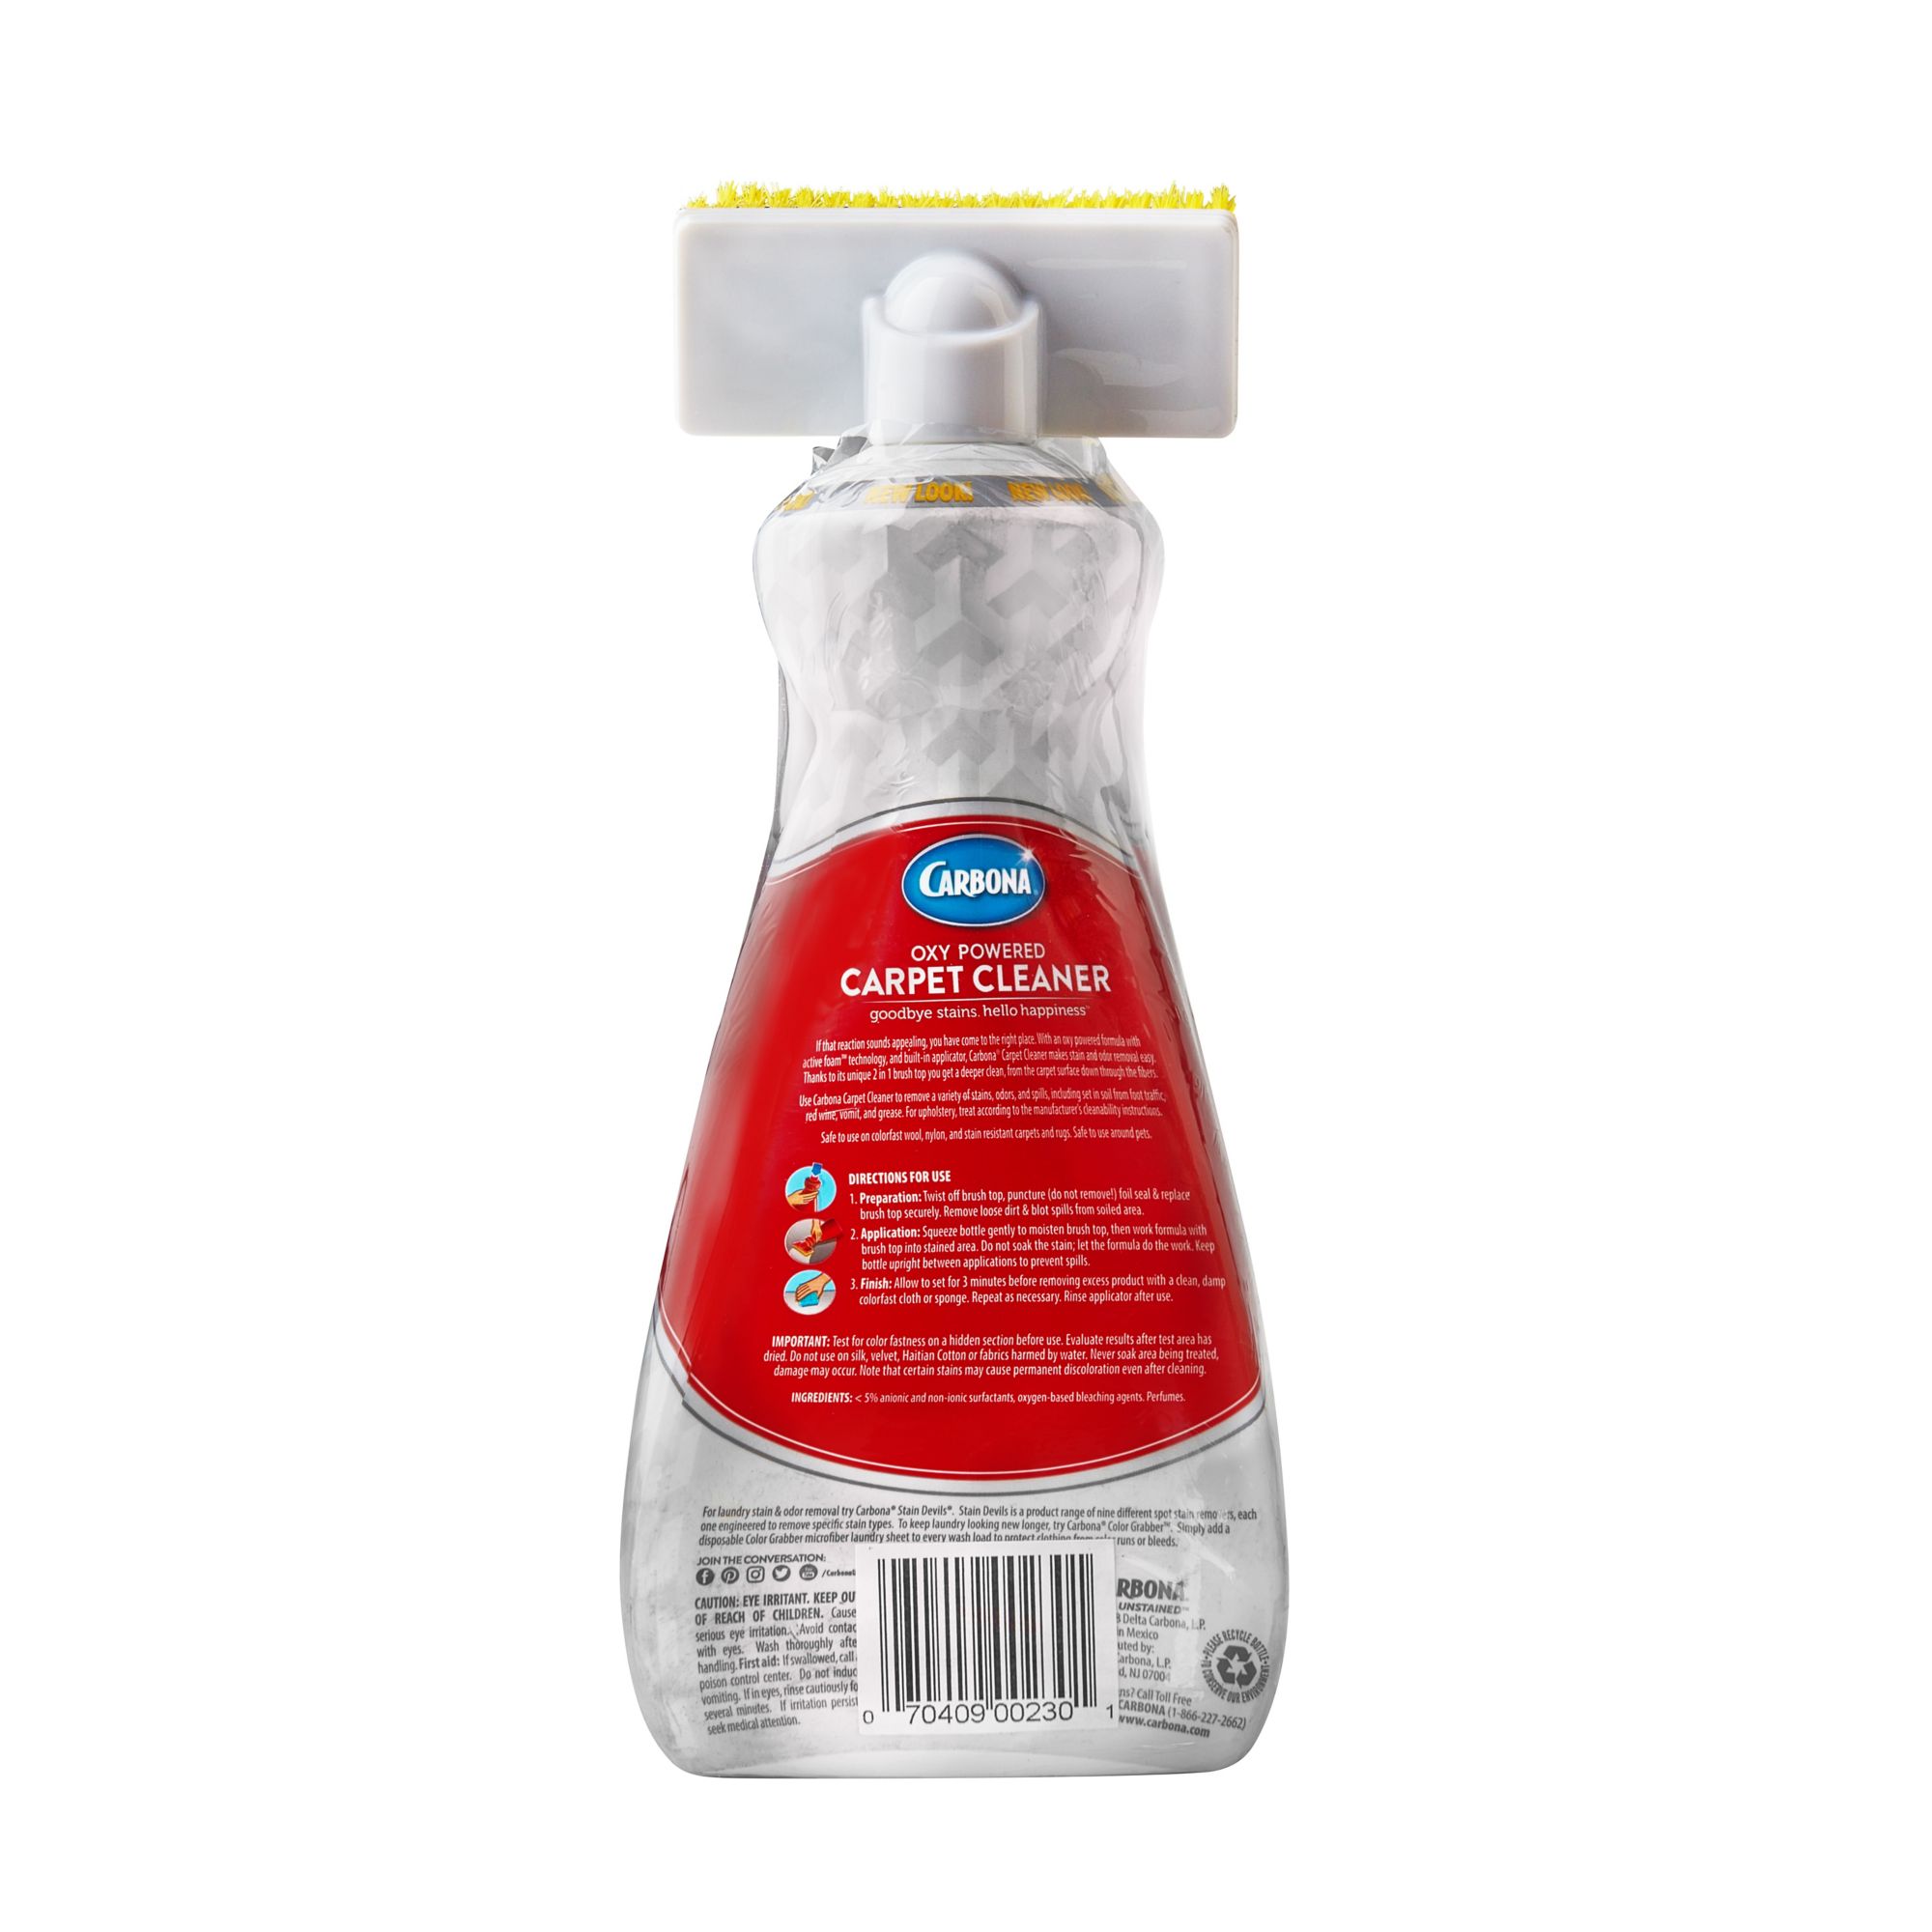 Carbona Pet Stain, Carbona Carpet Cleaner, Carbona Upholstery Cleaners, Carbona  Spot Lifter, Carbona Cleaning